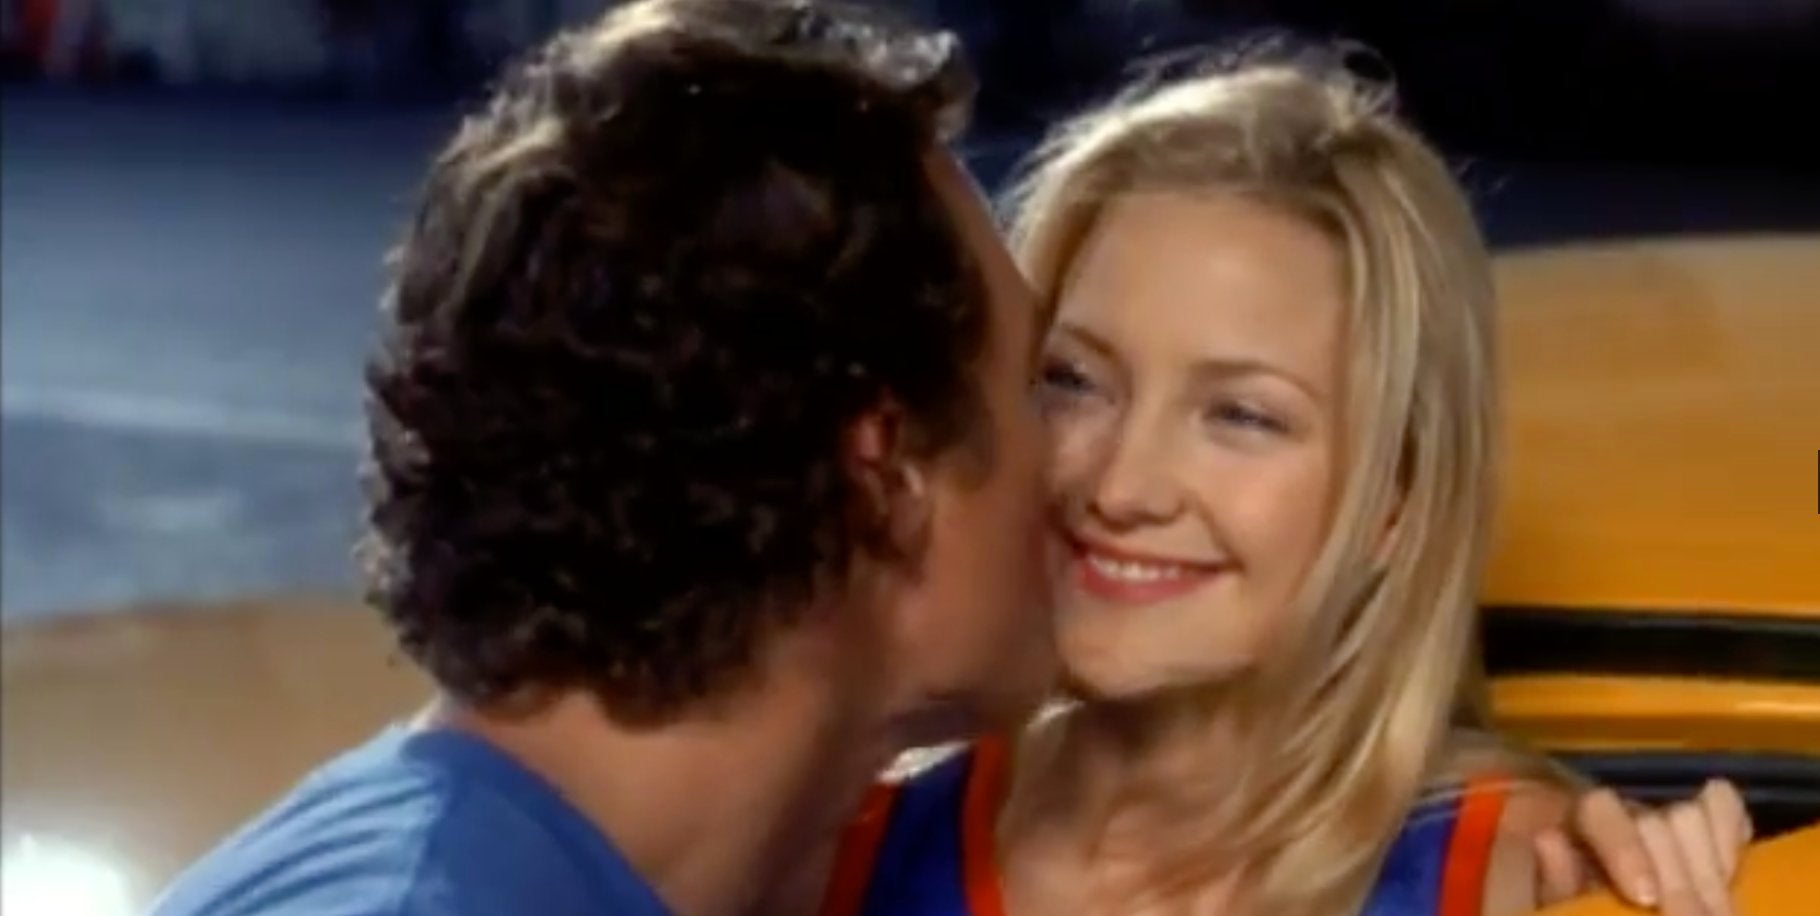 How to Lose a Guy in 10 days Kate Hudson Matthew McConaughey